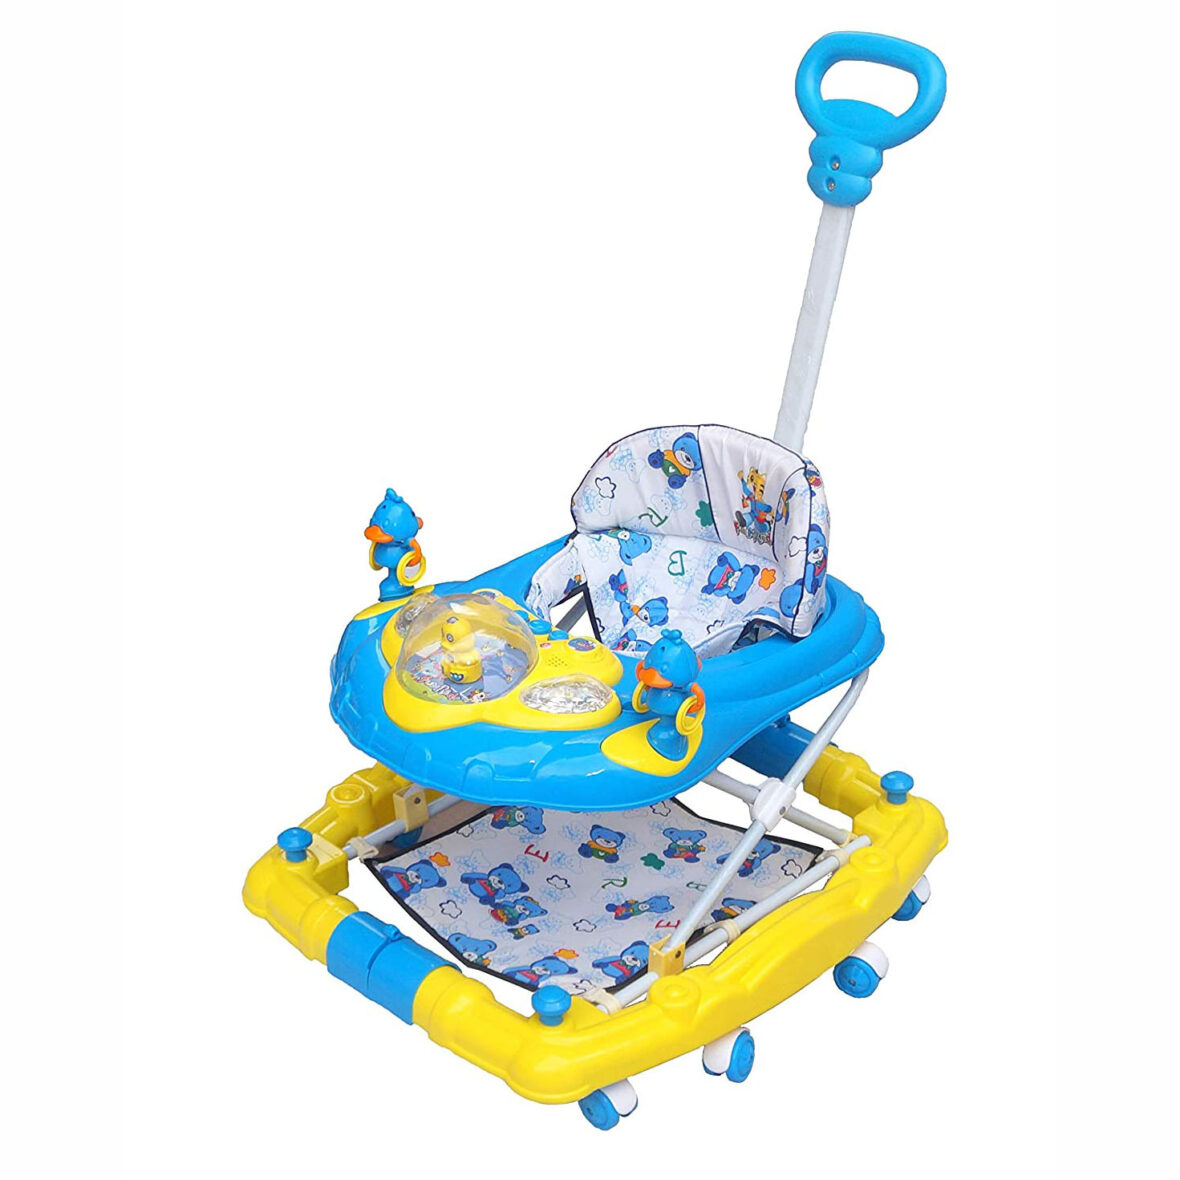 Musical Plastic Baby Walker with Adjustable Height Comfy 6-in-1 Activity with Rocker, Light and Parental Handle for Kids 9 Months + (Blue)